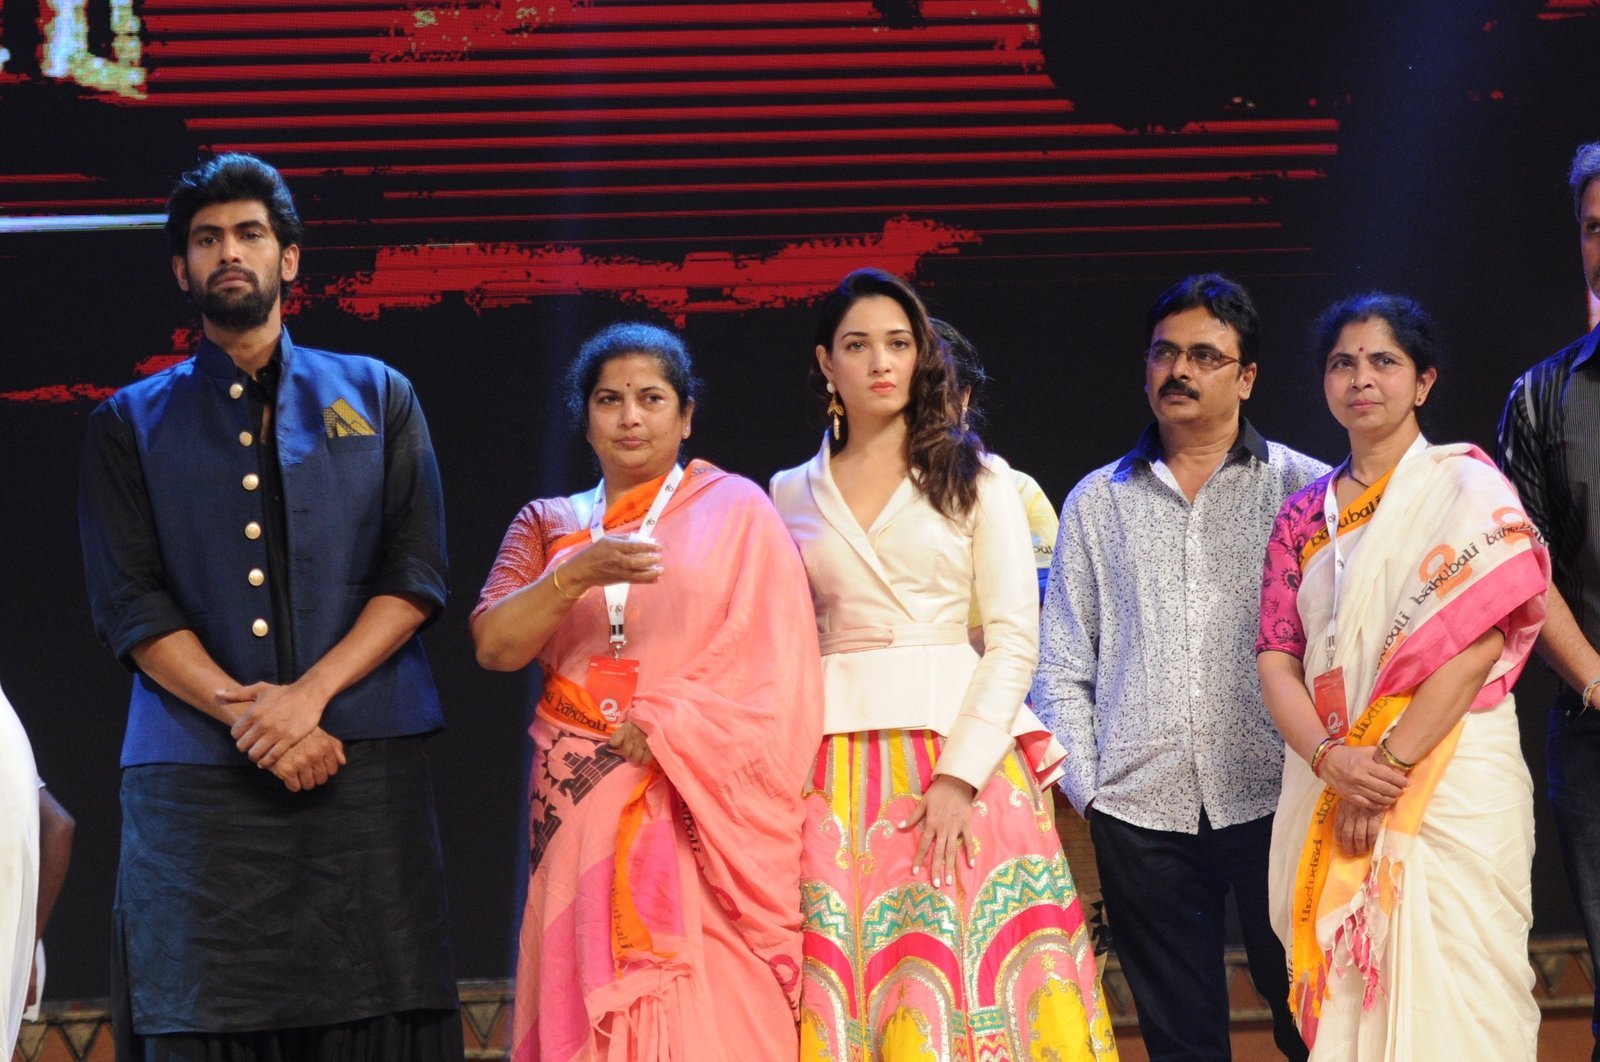 Baahubali 2 Pre Release Event Function Photos | Picture 1486764